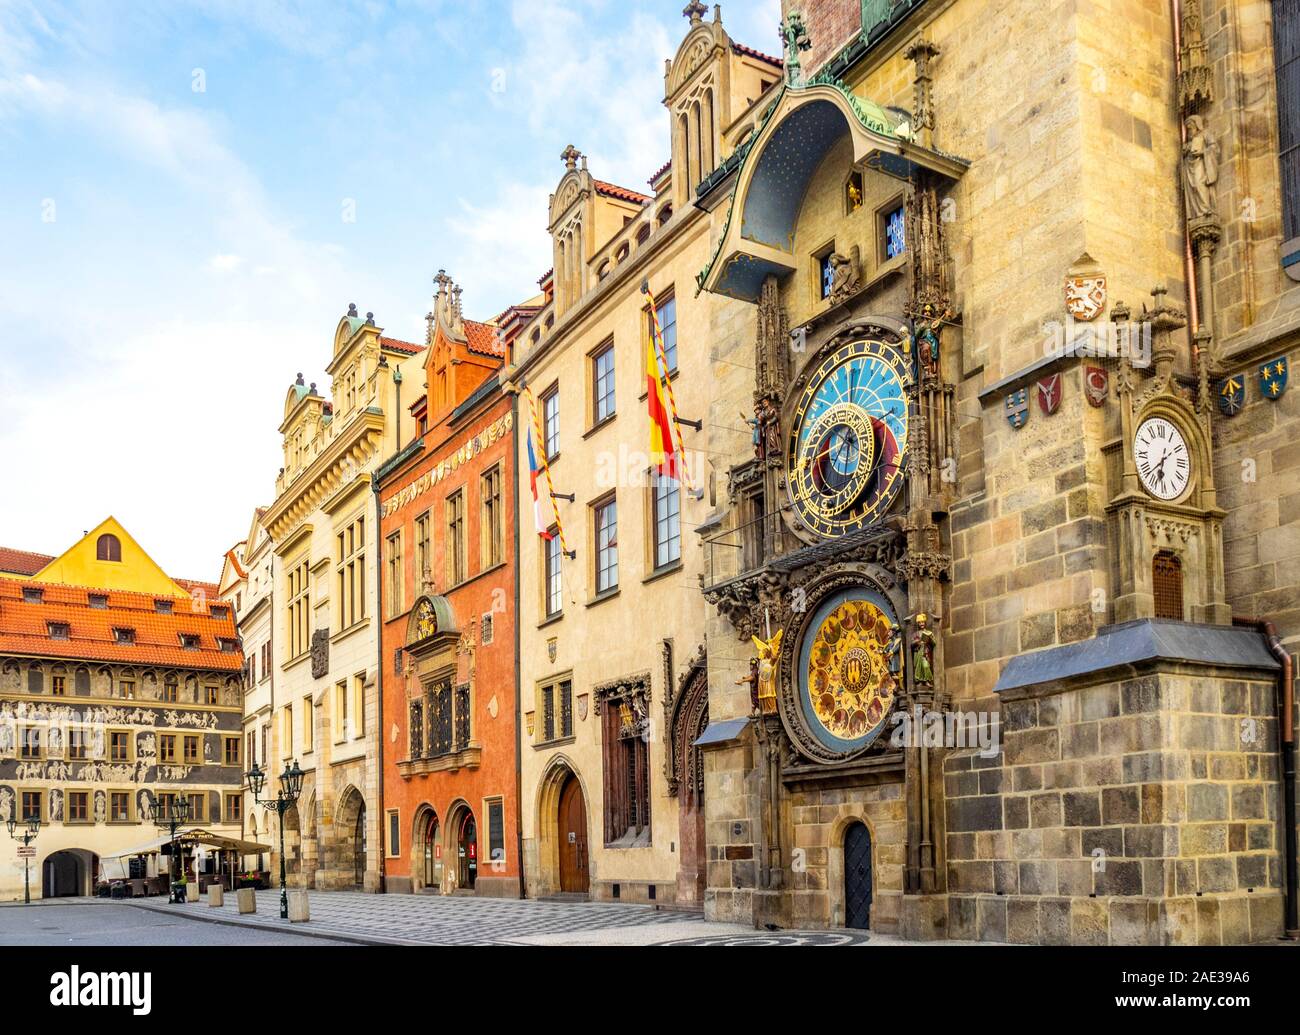 Historic Dum u Minuty with ornate decorative sgraffito and medieval astronomical clock in the Old Town Hall Prague Czech Republic. Stock Photo